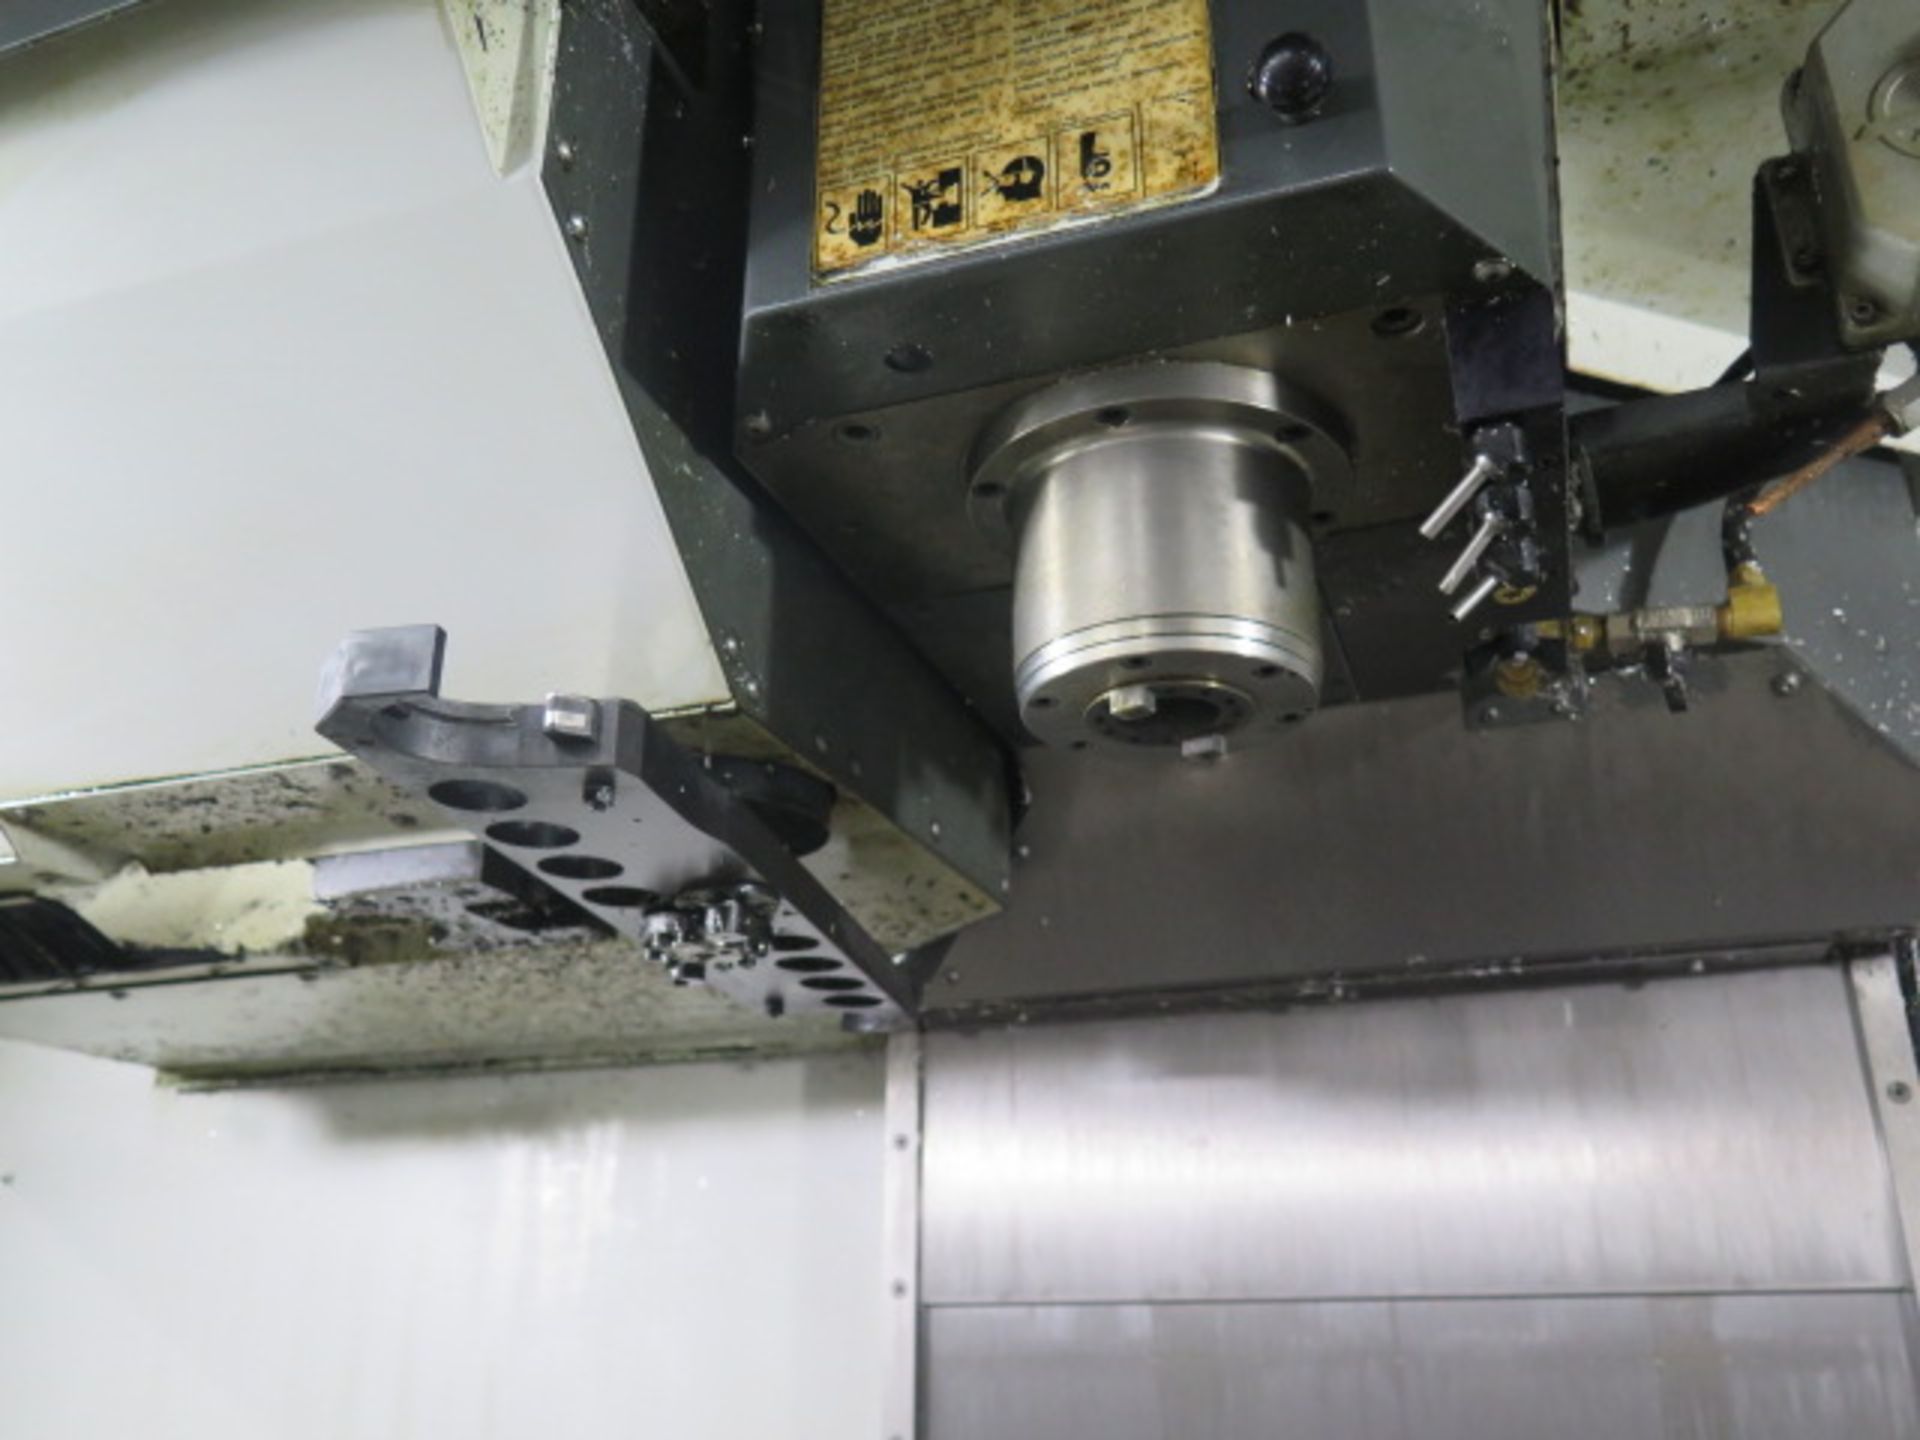 2011 Haas VF-3SS 4-Axis CNC Vertical Machining Center s/n 1087709 w/ Haas Controls, Hand Wheel, 24-S - Image 9 of 17